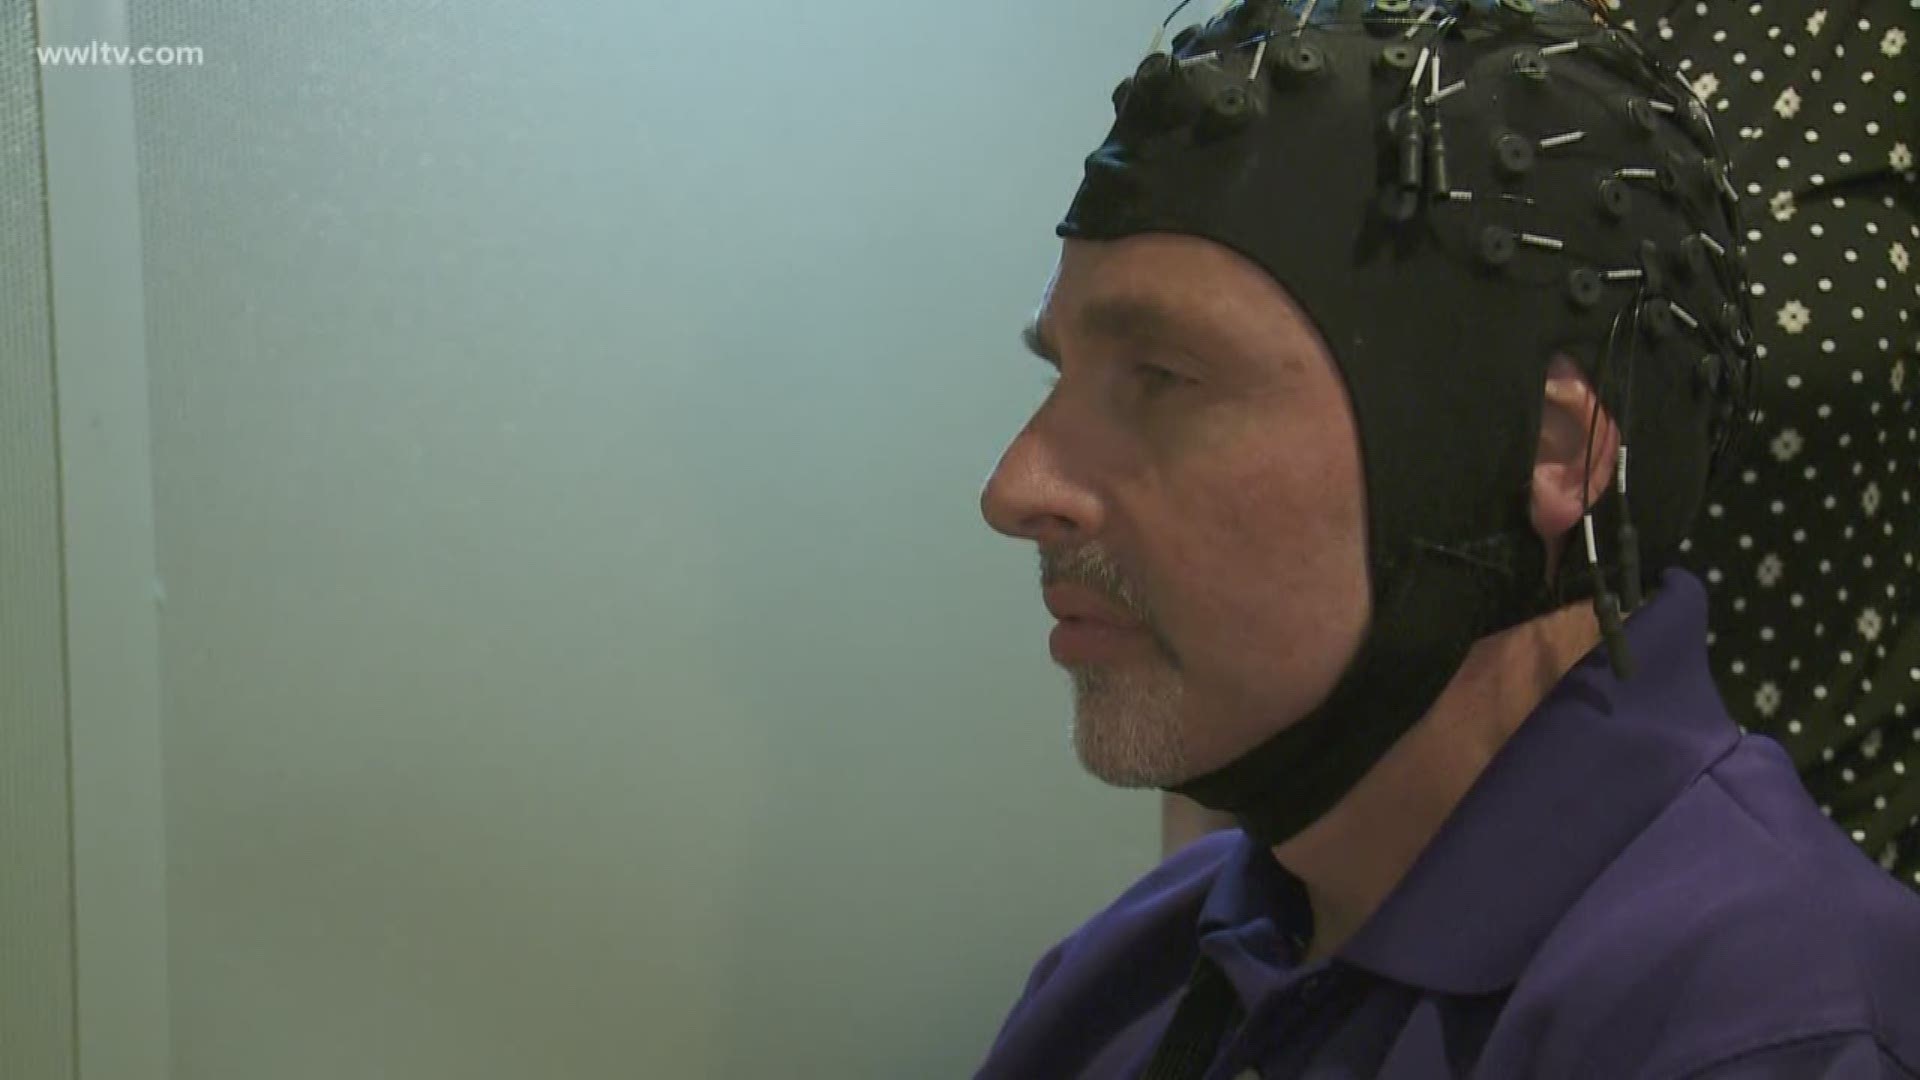 Jim finished his 12 weeks of free memory rehab, and he does notice some improvement, but LSU doctors are looking for more people with MS to join the study.